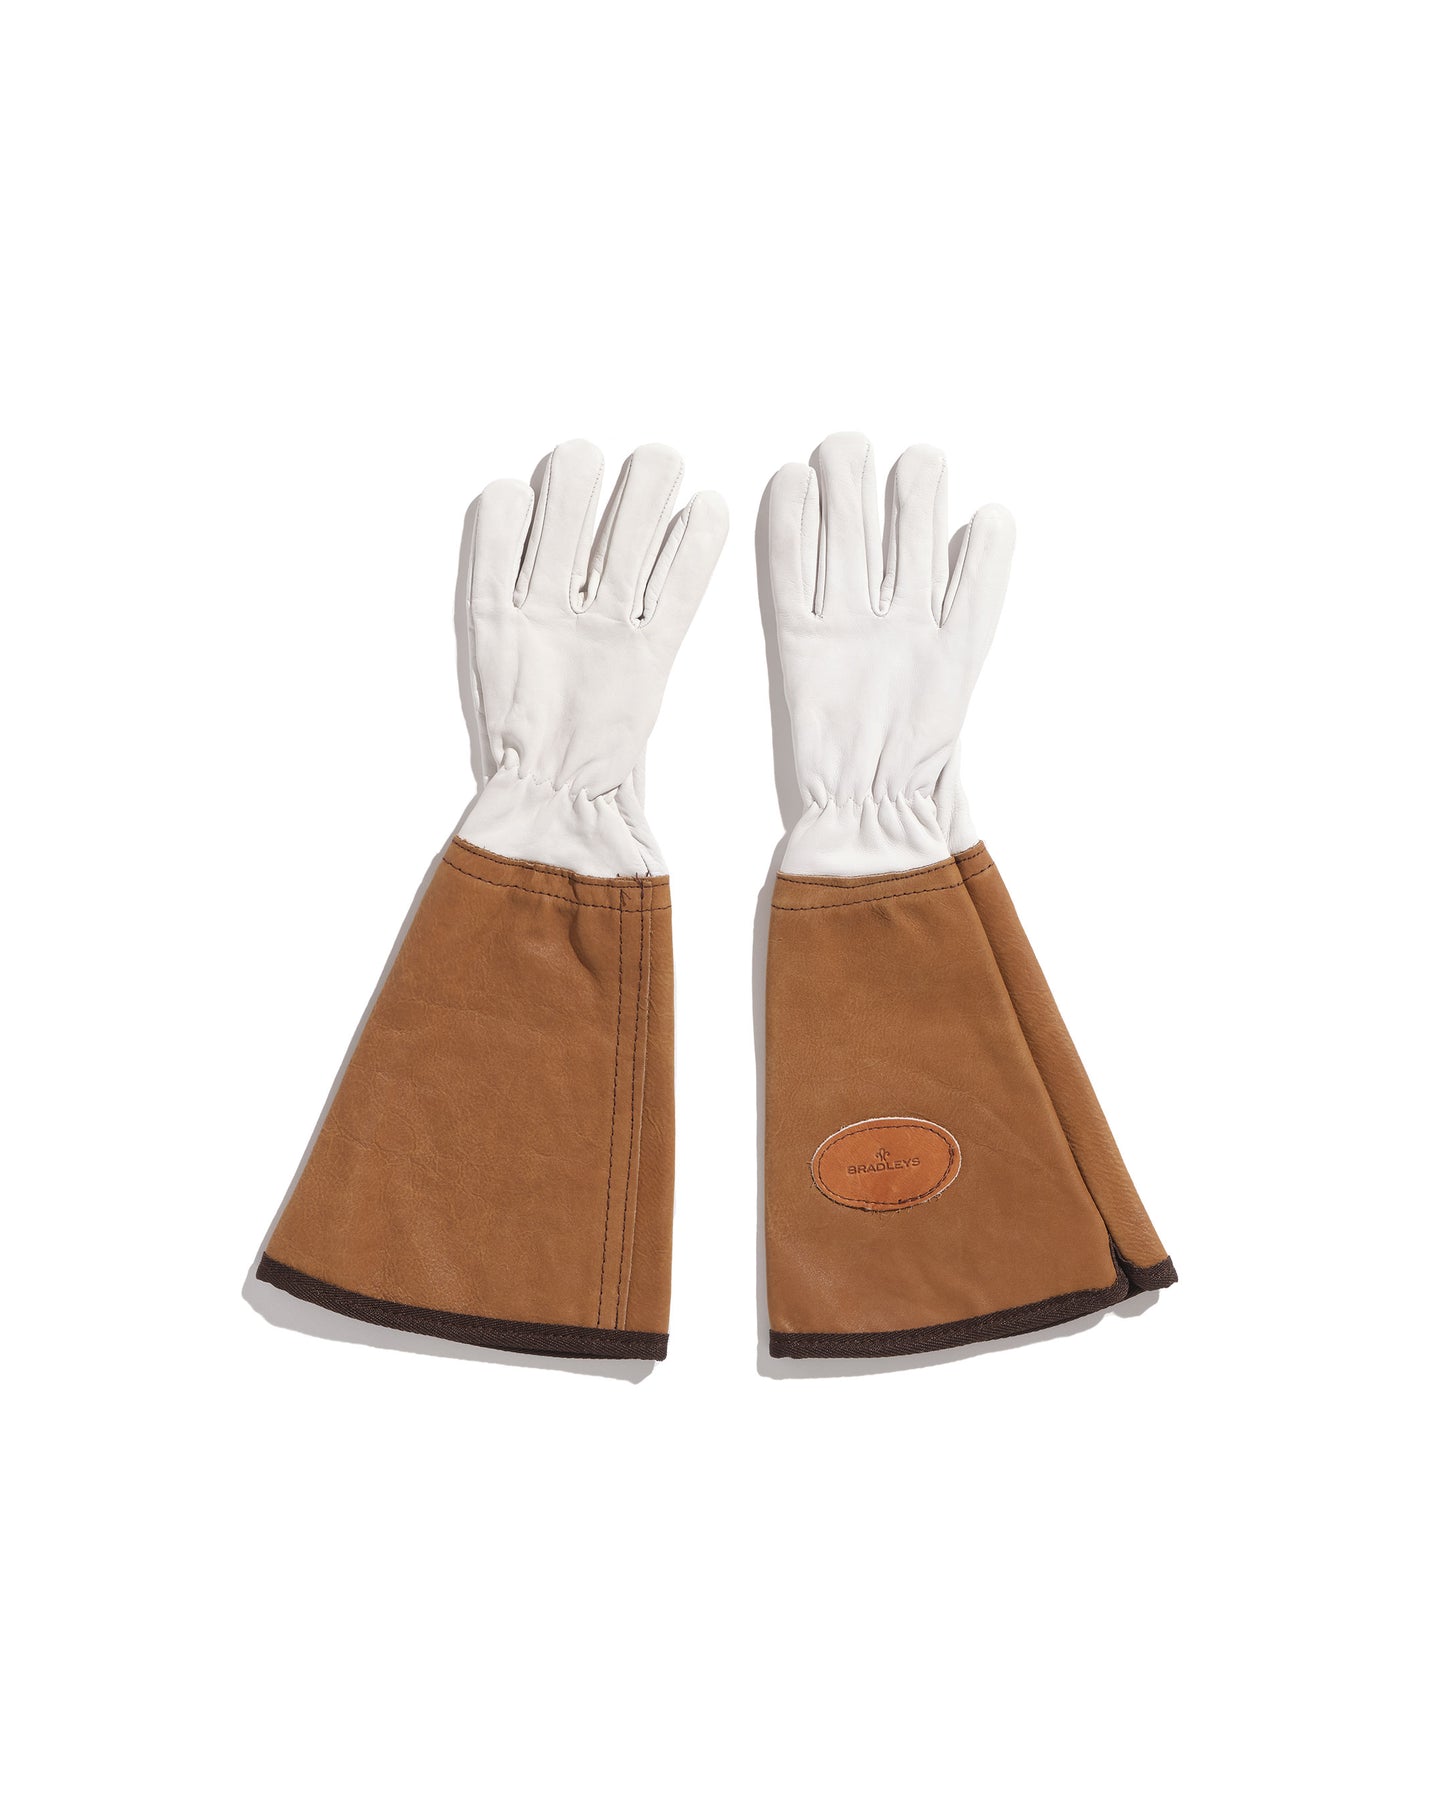 Long thick leather gardening gloves